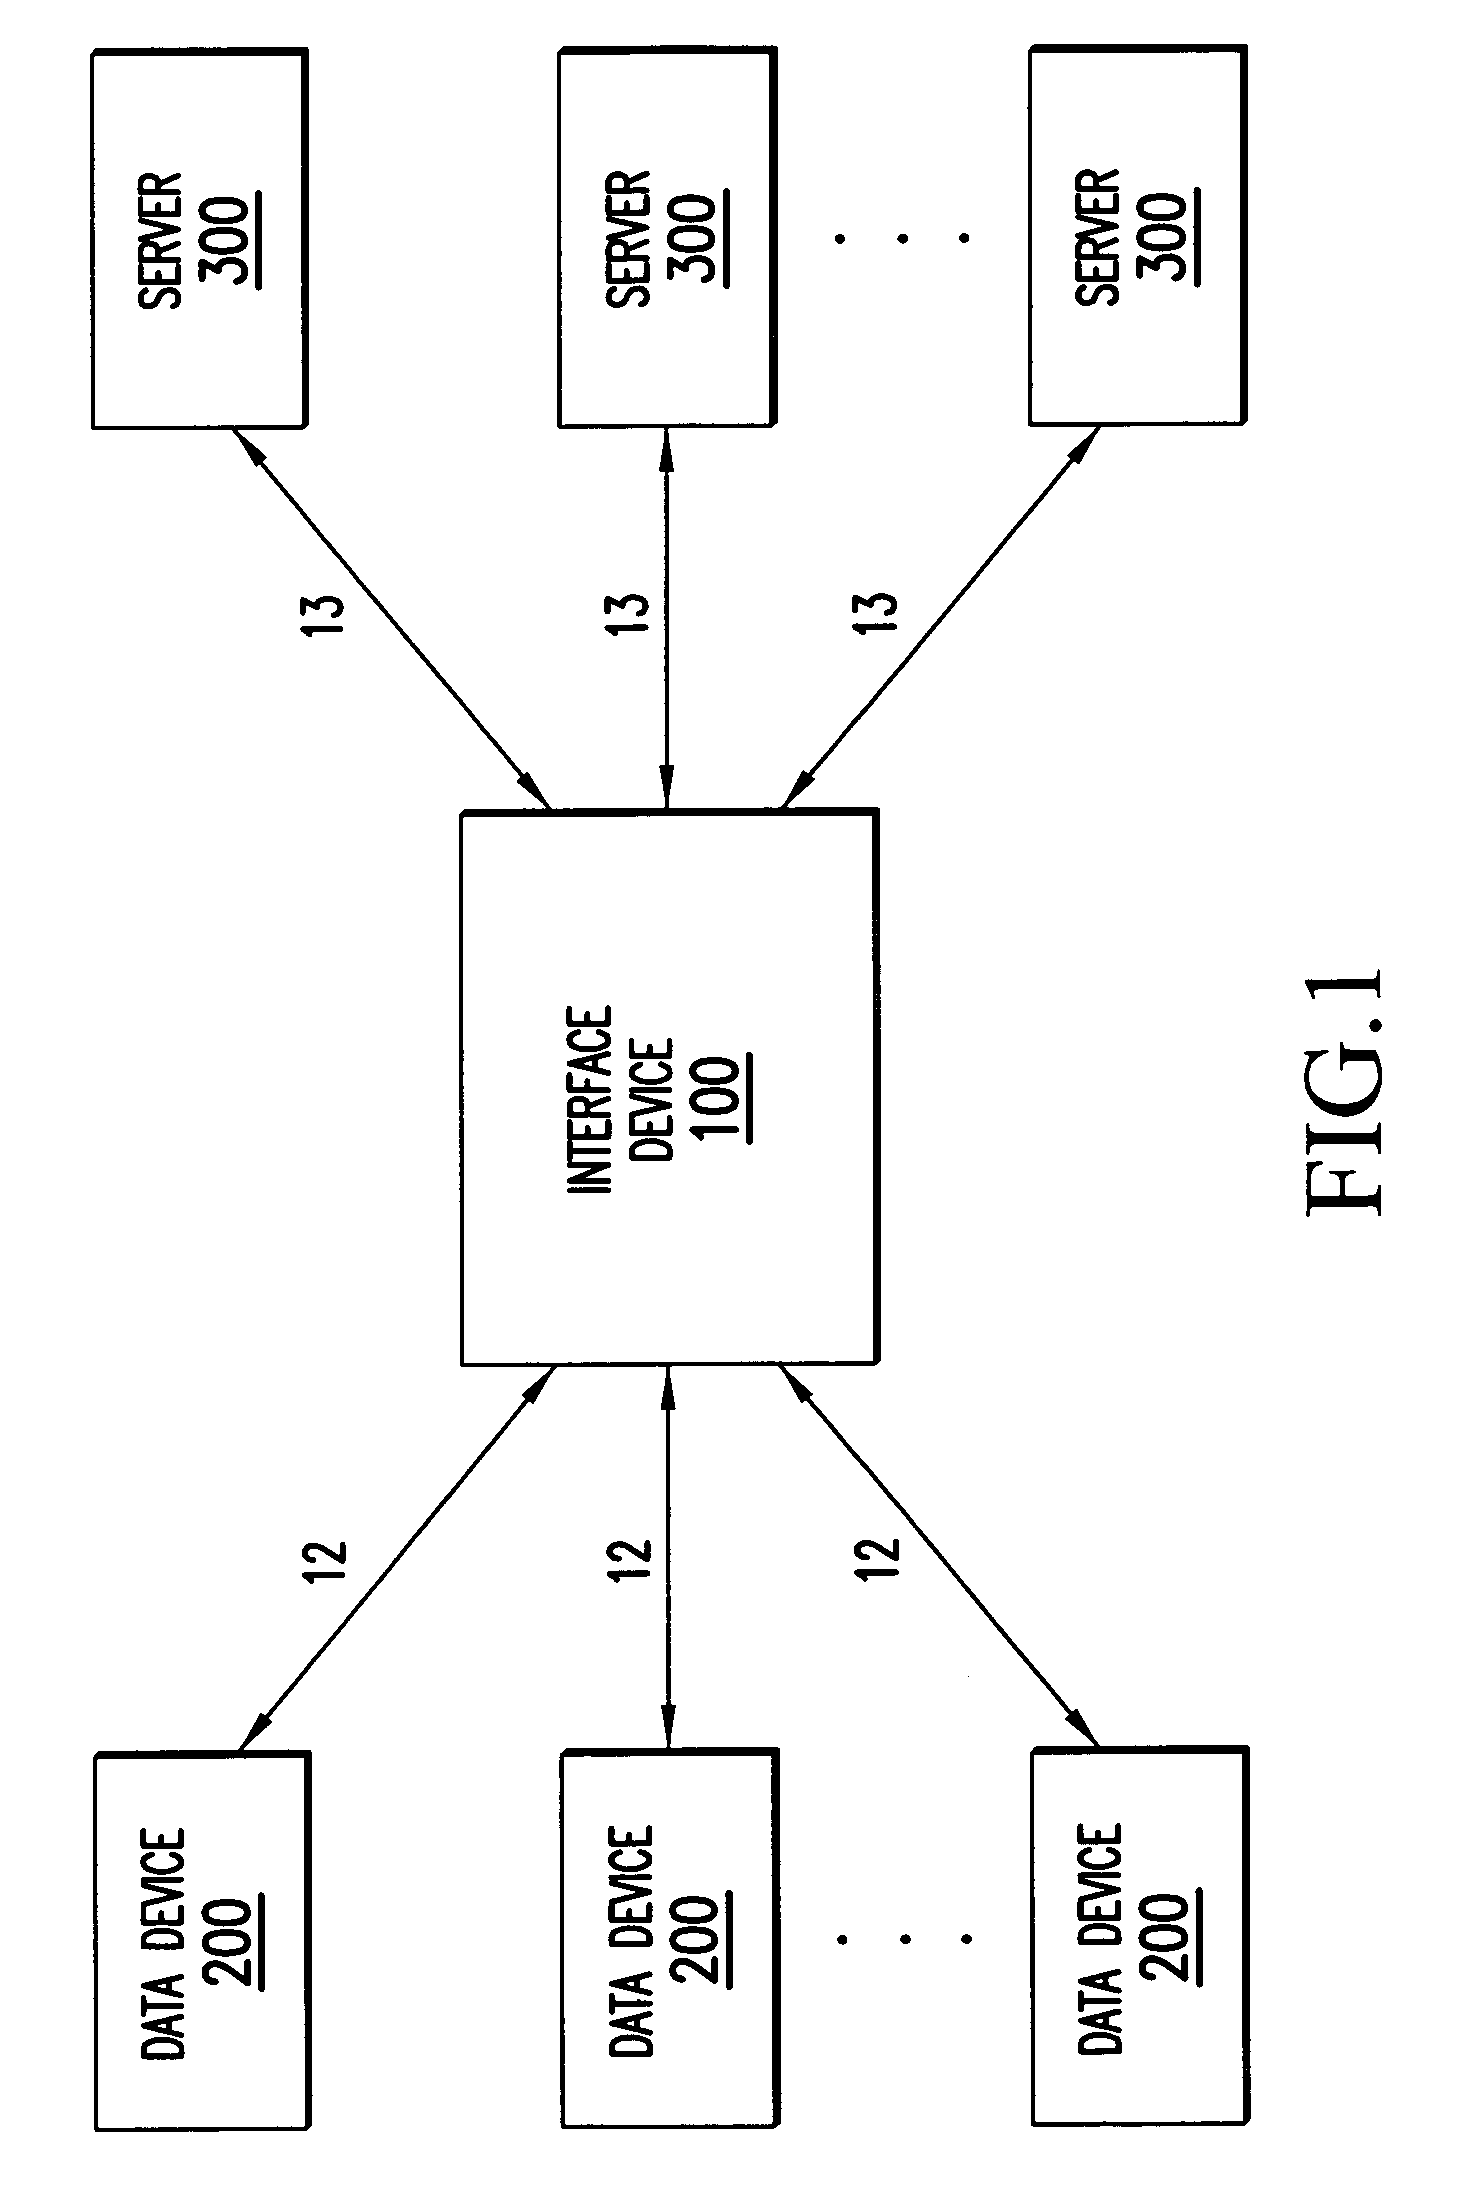 Method and device for providing interfaces that are tailored to specific devices